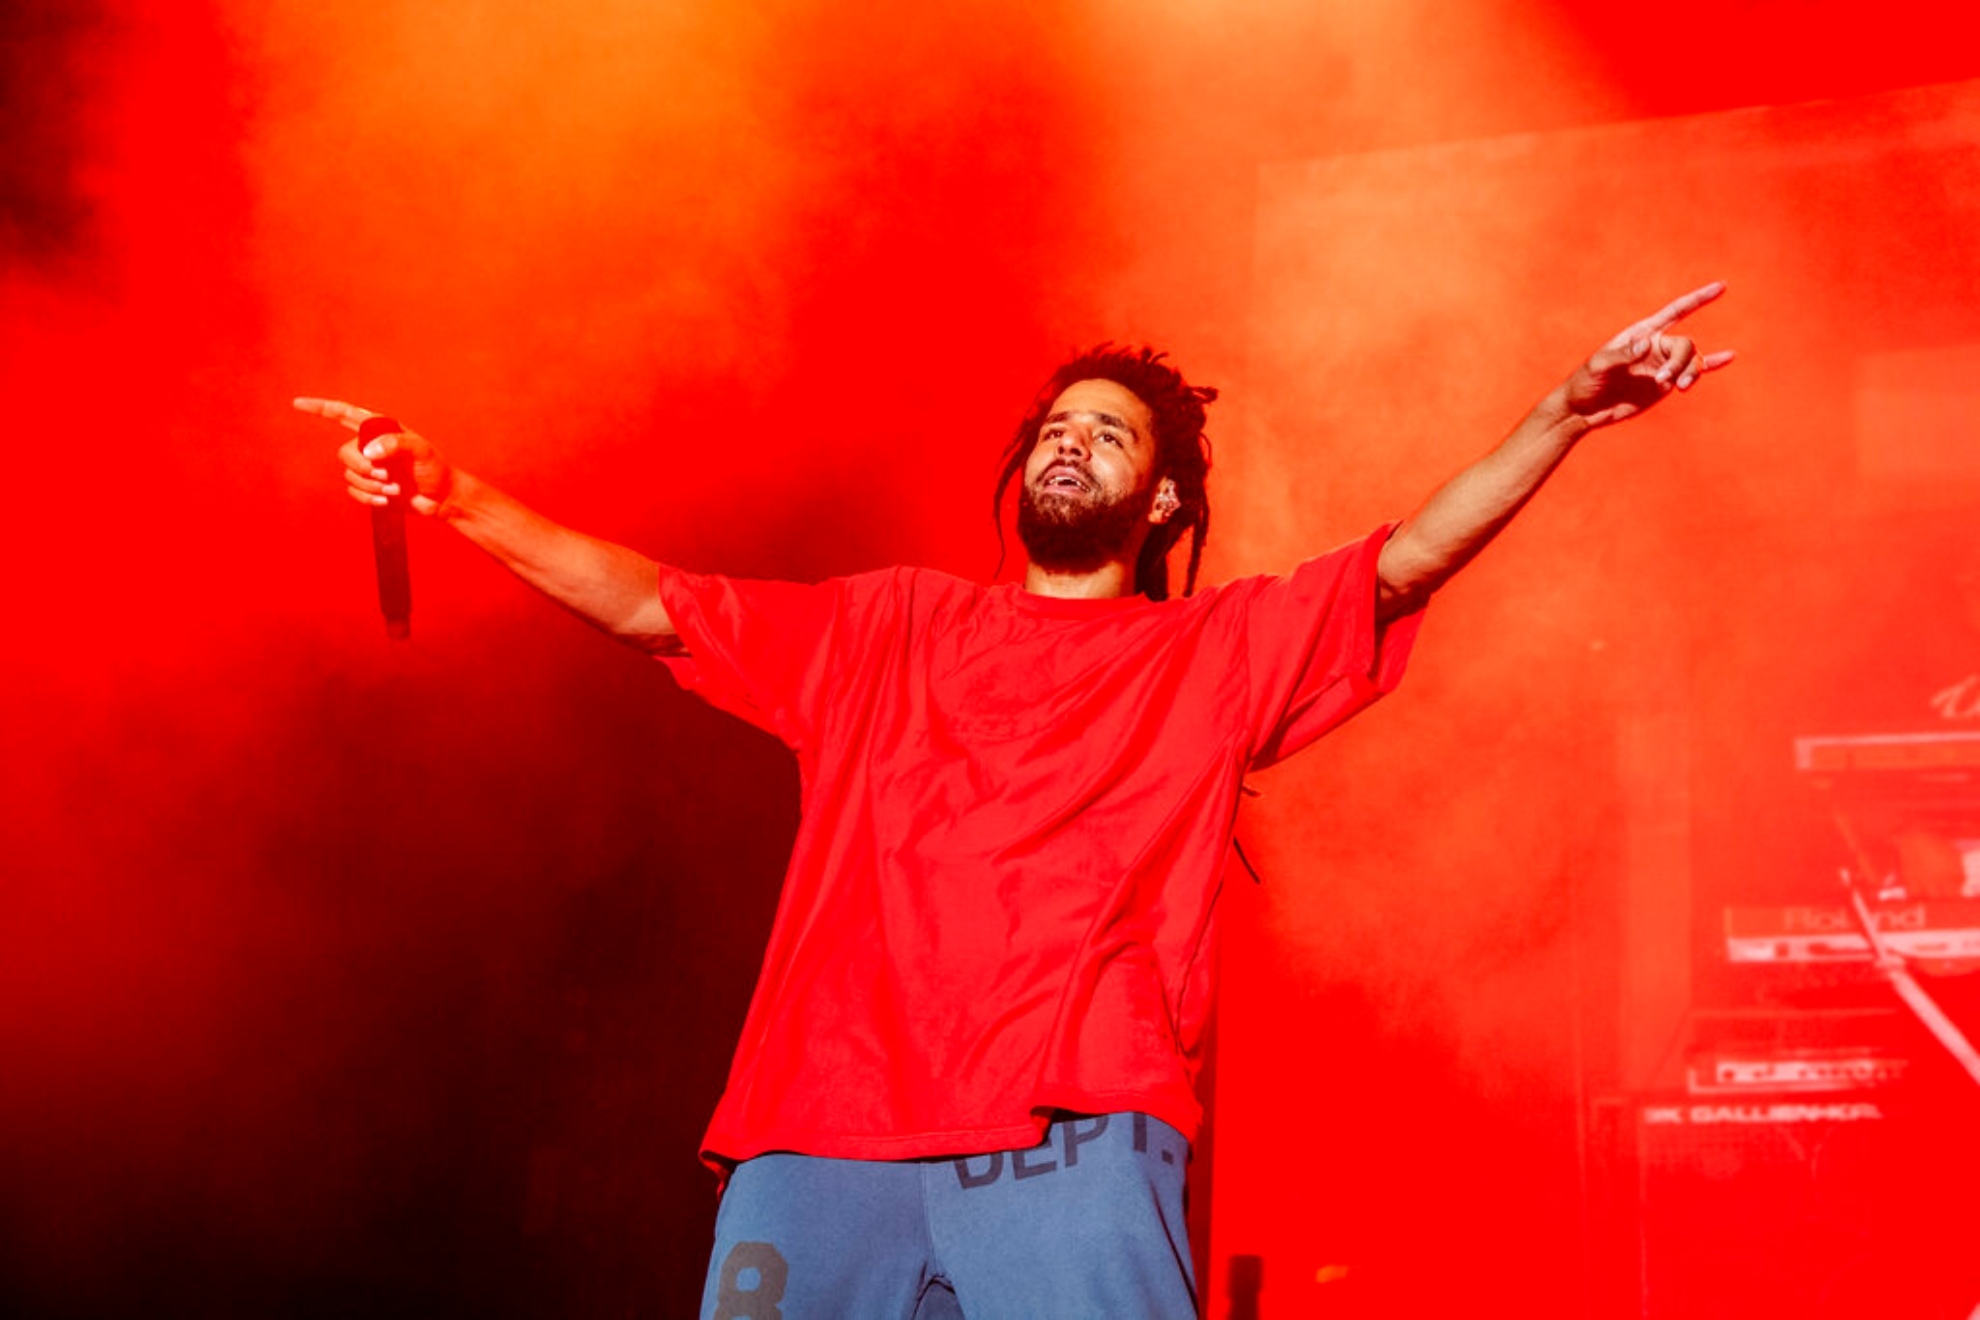 J.Cole takes down 7-minute Drill from streaming platforms the lamest s**t I did in my f****n life